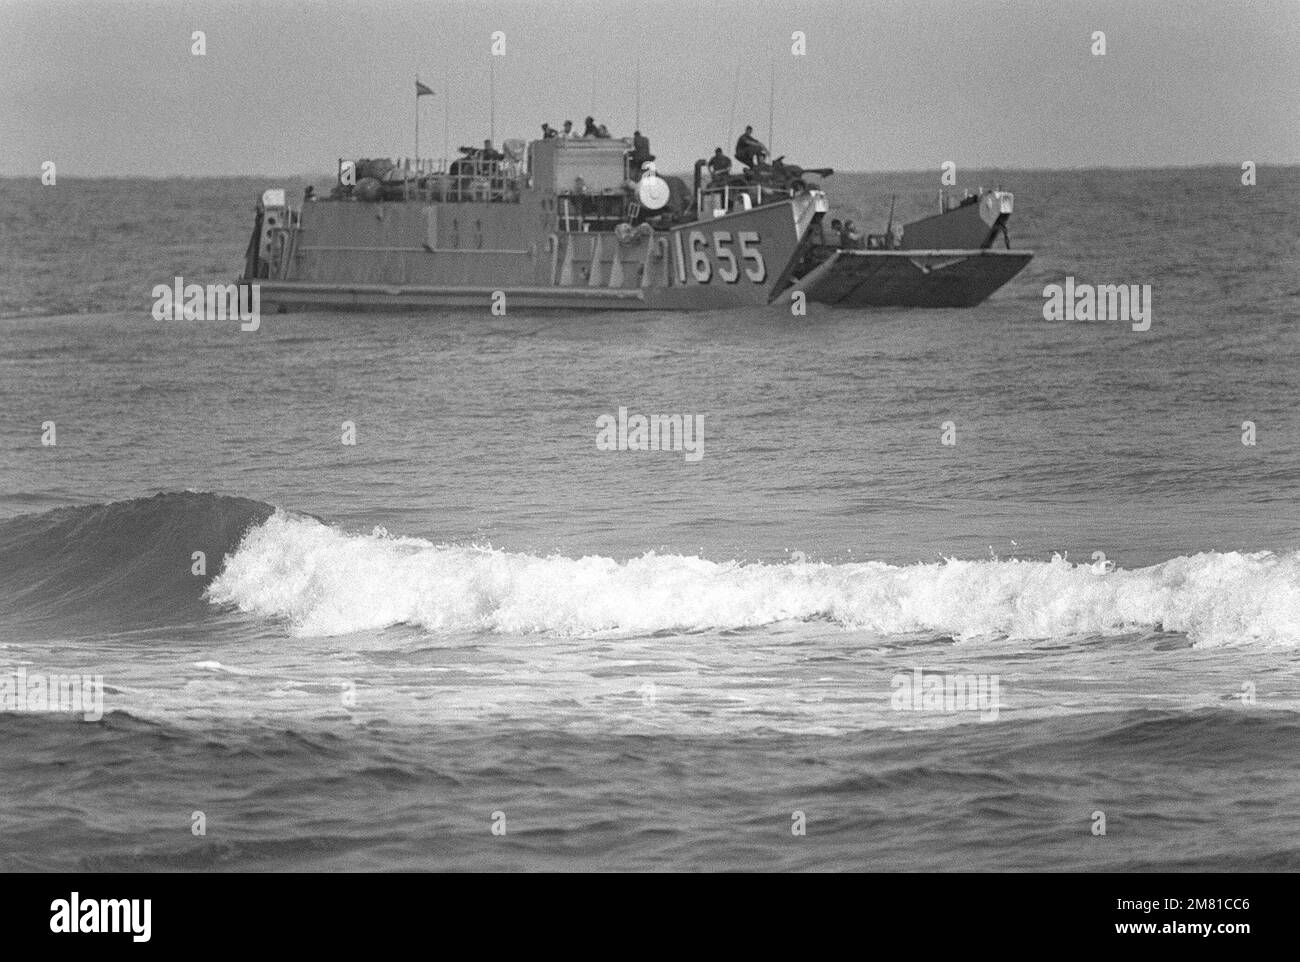 A utility landing craft (LCU 1655) approaches the beach as an assault takes place during the AHUAS TARA II (BIG PINE) operation. Subject Operation/Series: AHUAS TARA II (BIG PINE) Base: Puerto Castilla Country: Honduras (HND) Stock Photo